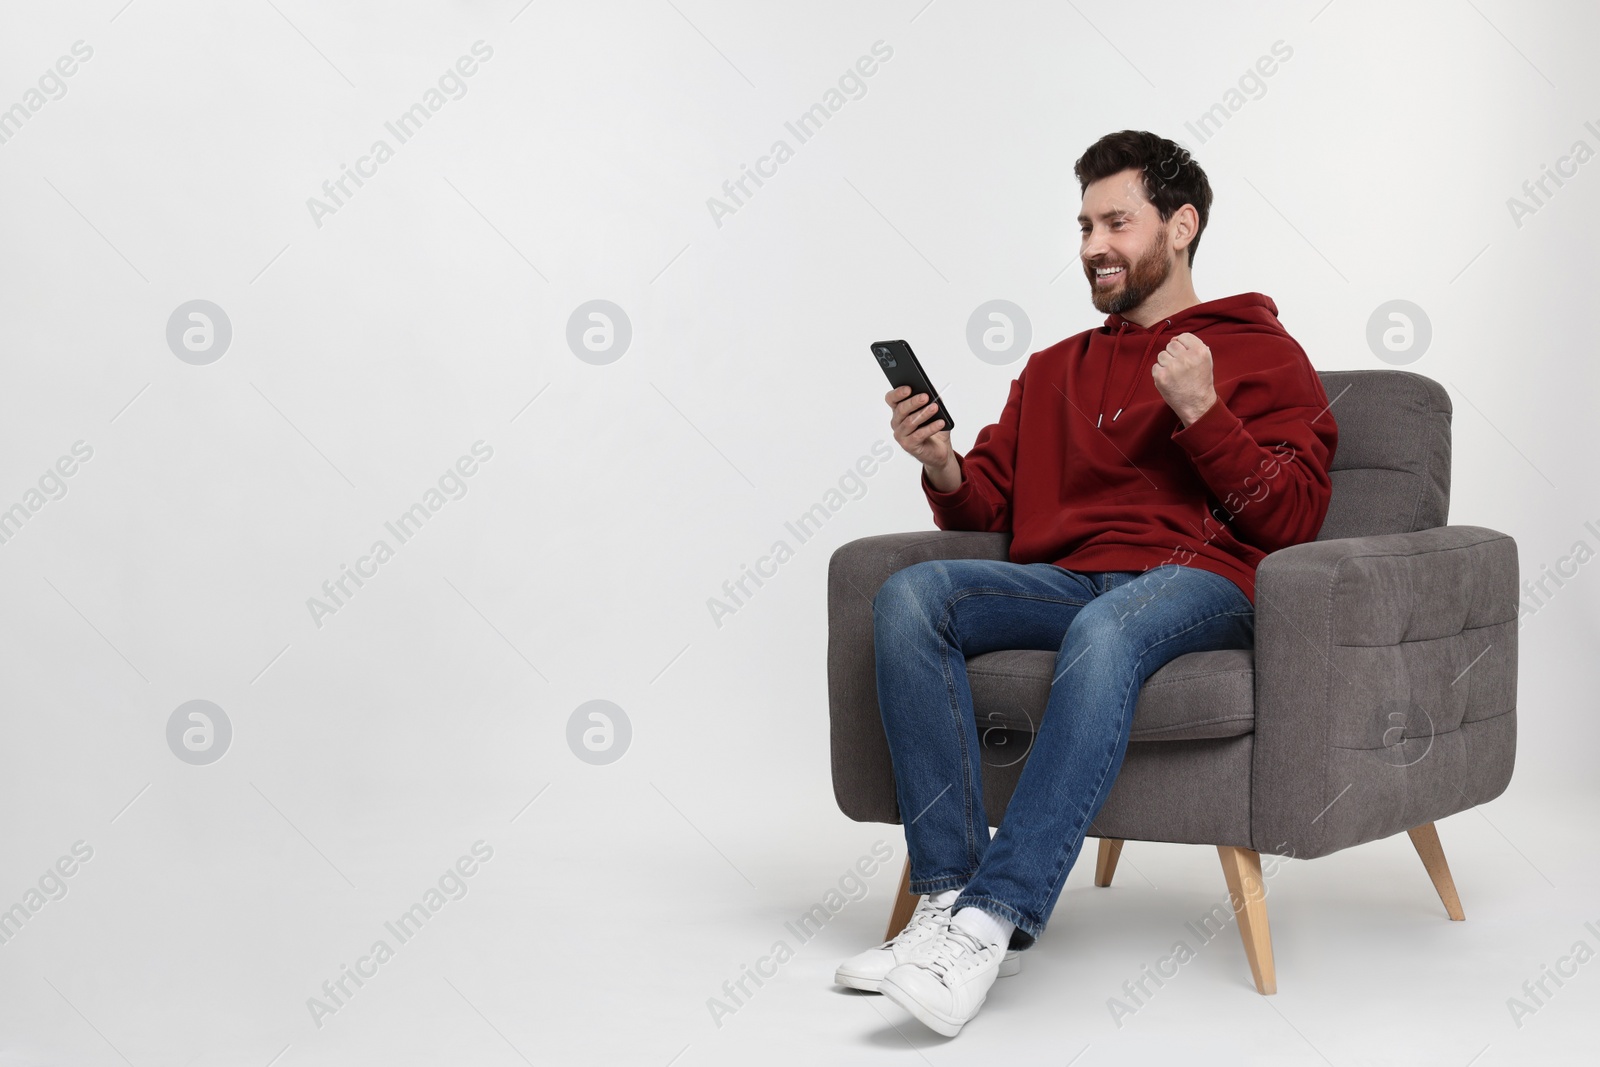 Photo of Happy man with smartphone sitting on armchair against white background. Space for text